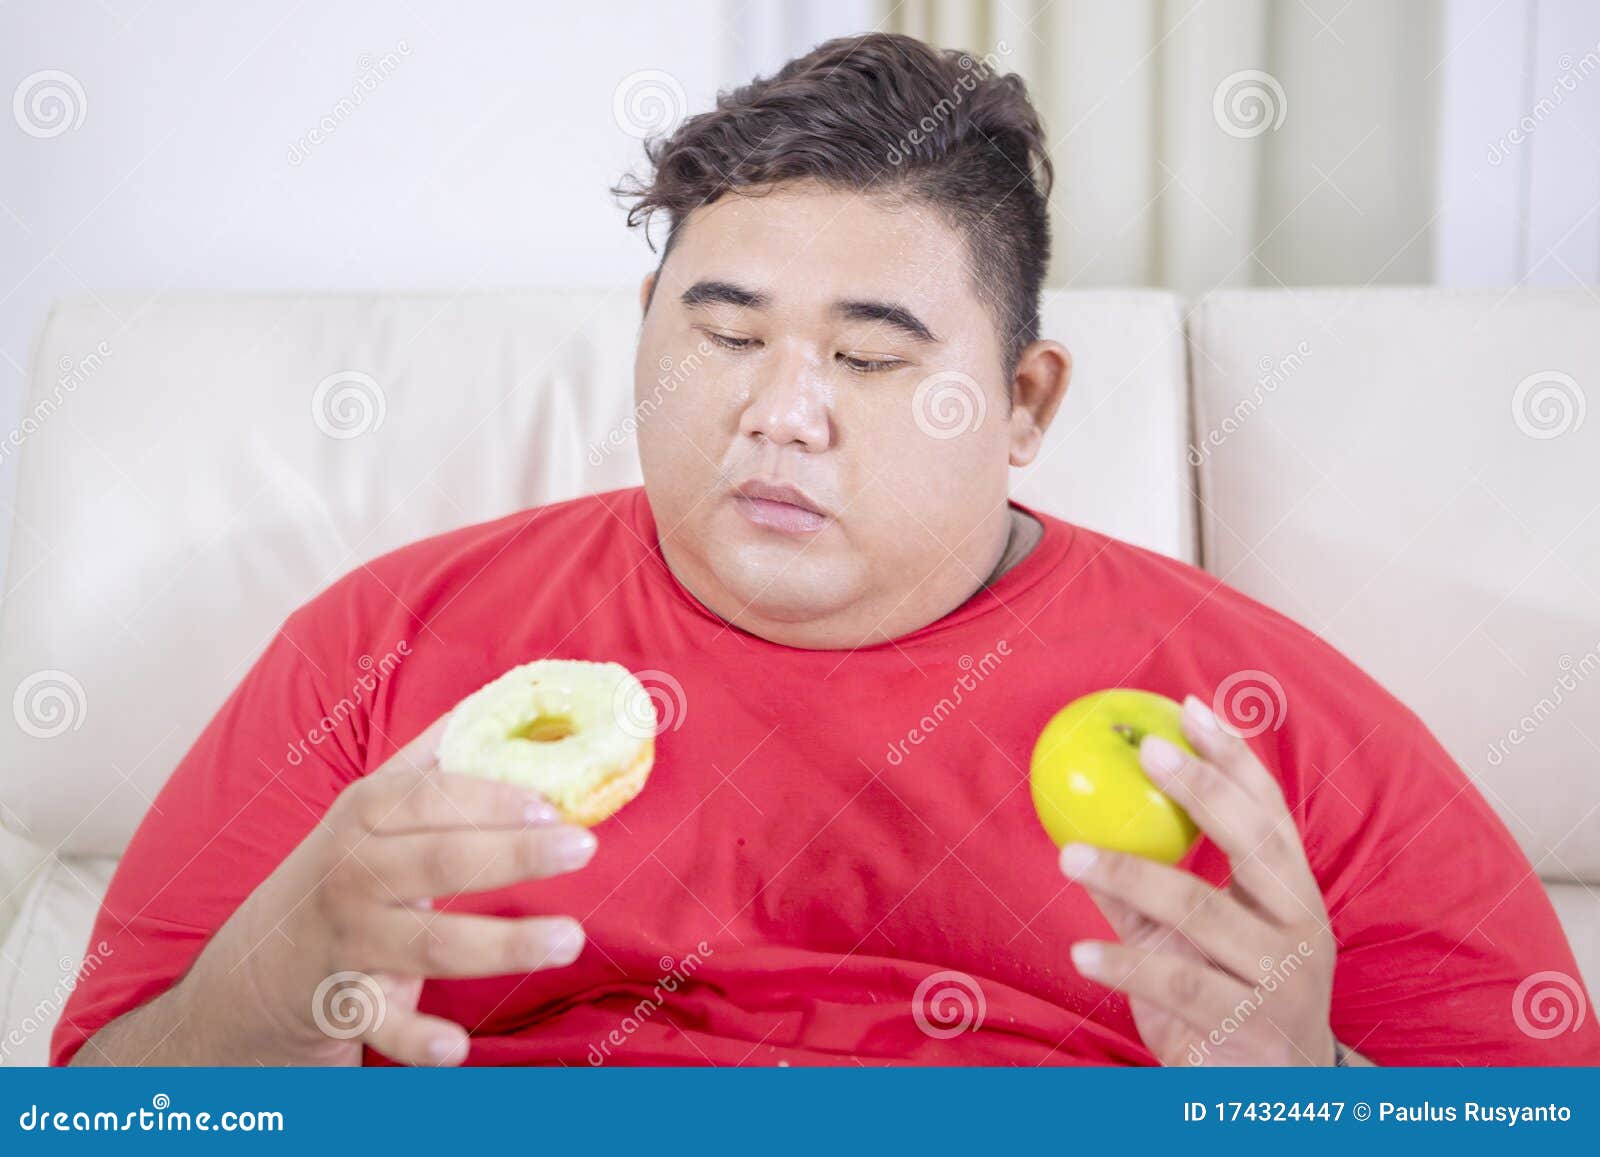 fat-asian-man-confused-doughnut-apple-portrait-sitting-couch-choosing-his-living-room-174324447.jpg